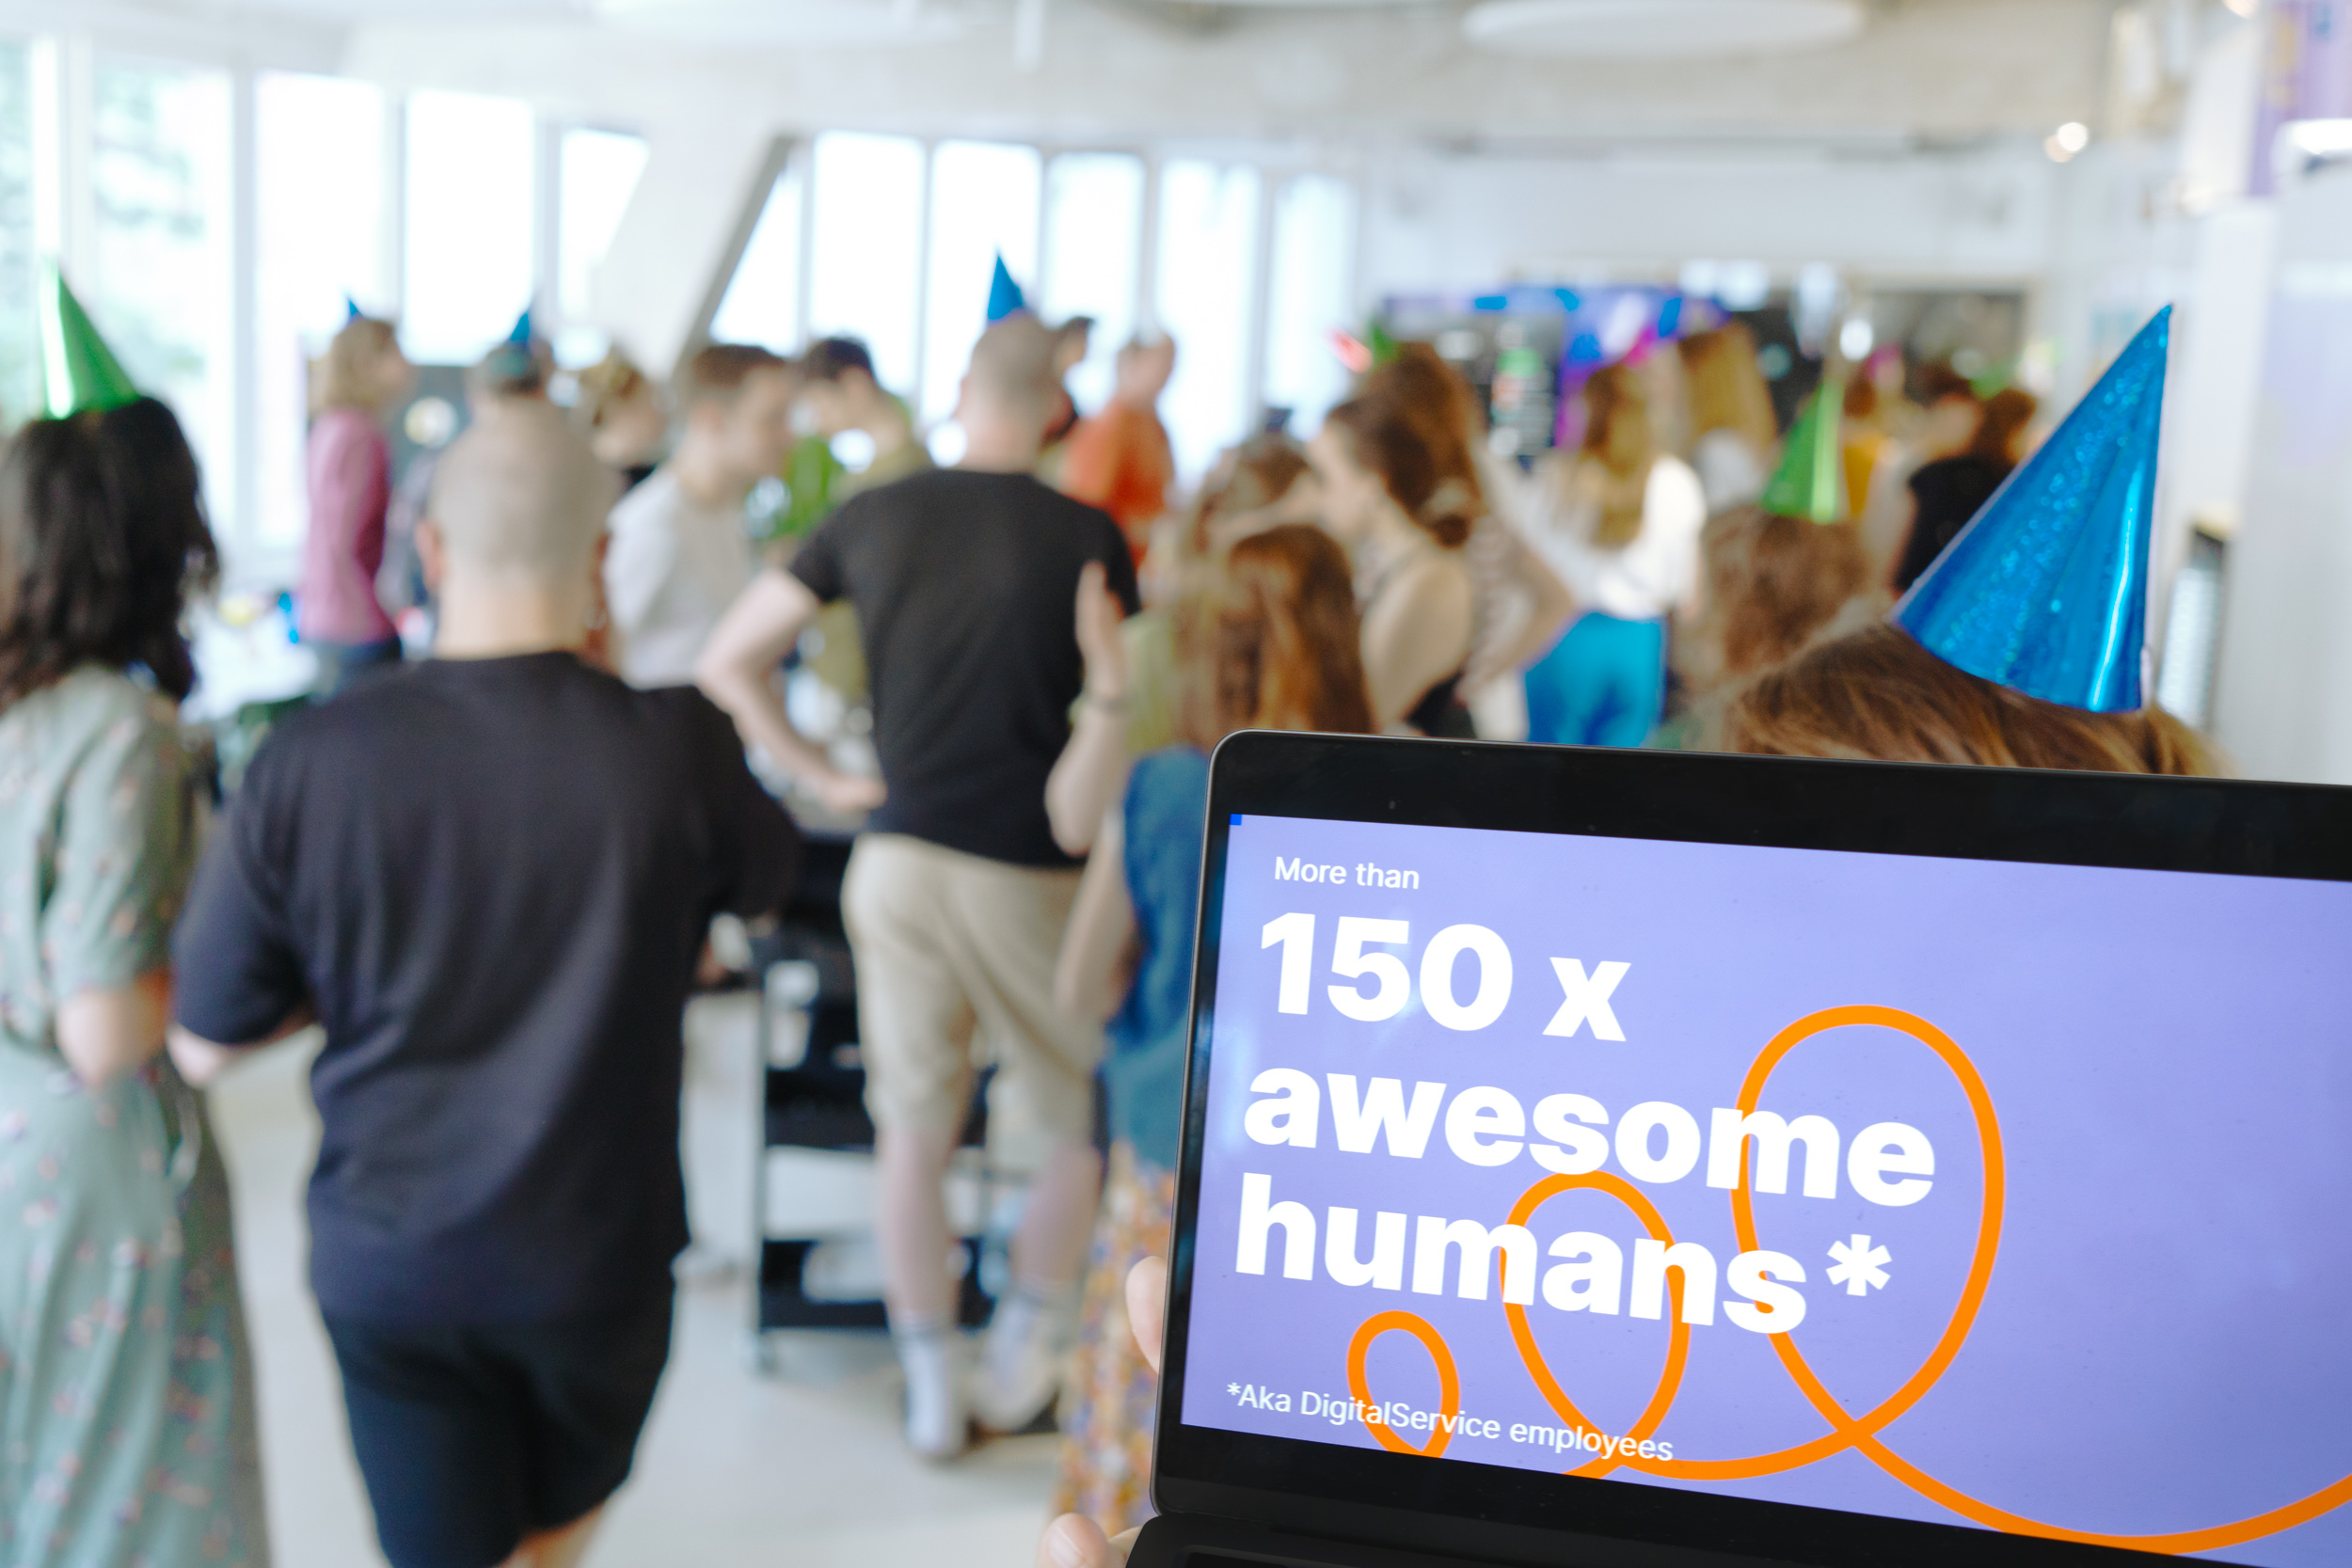 In the foreground, a laptop screen shows that more than 150 employees now work at DigitalService; in the background, numerous employees can be seen celebrating together in a blur